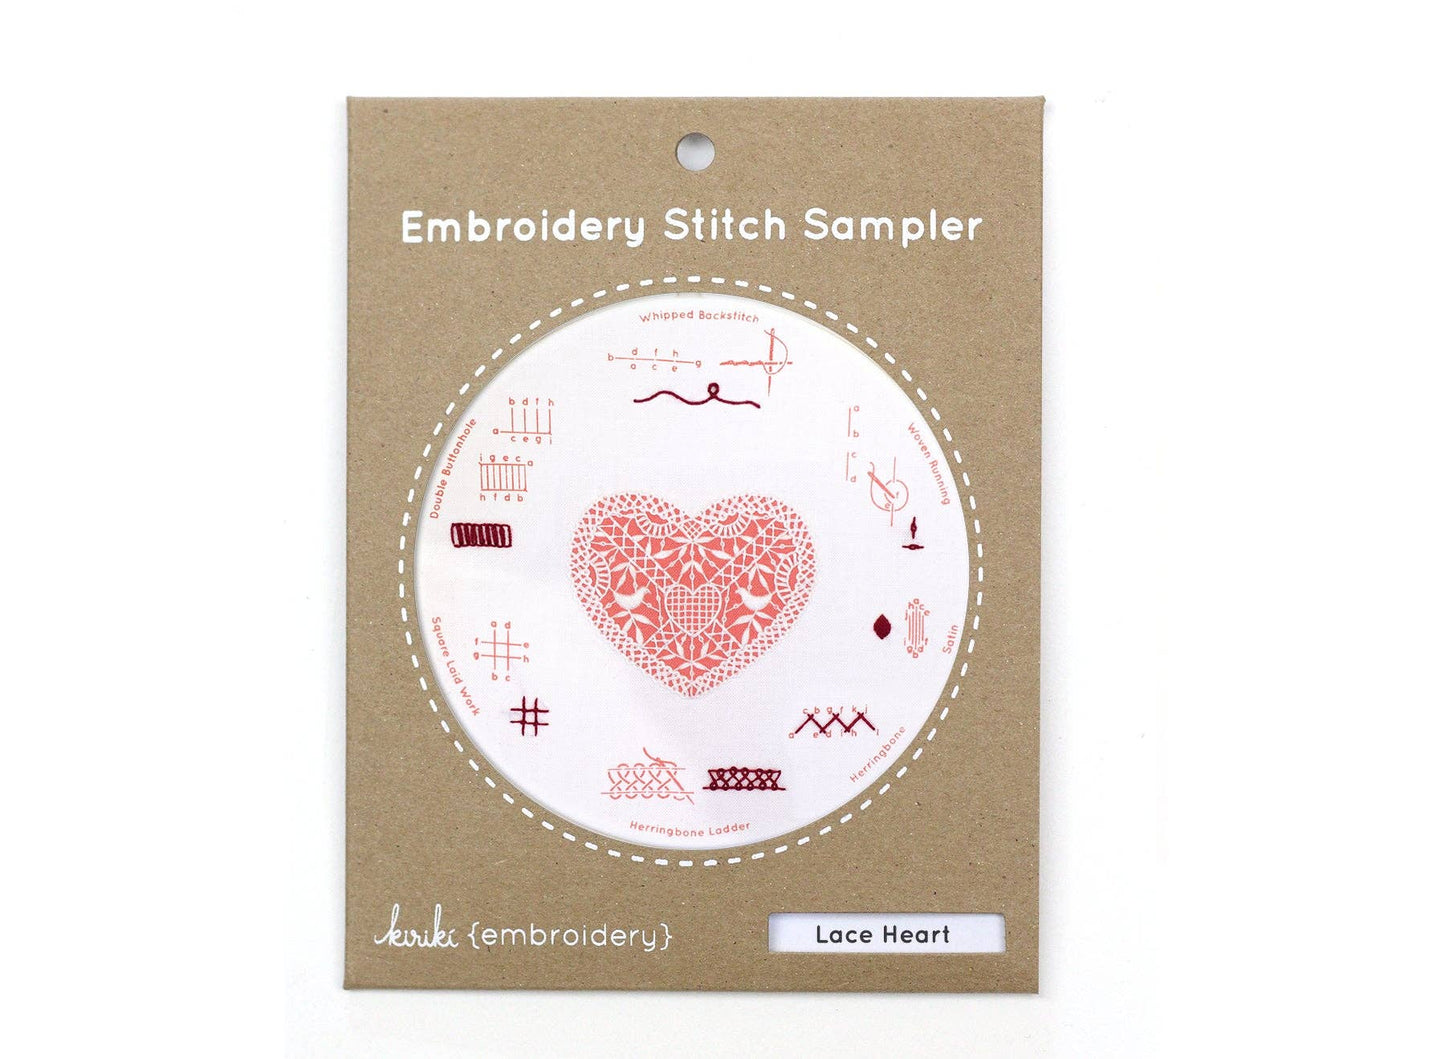 Lace Heart Embroidery Kit - homesewn